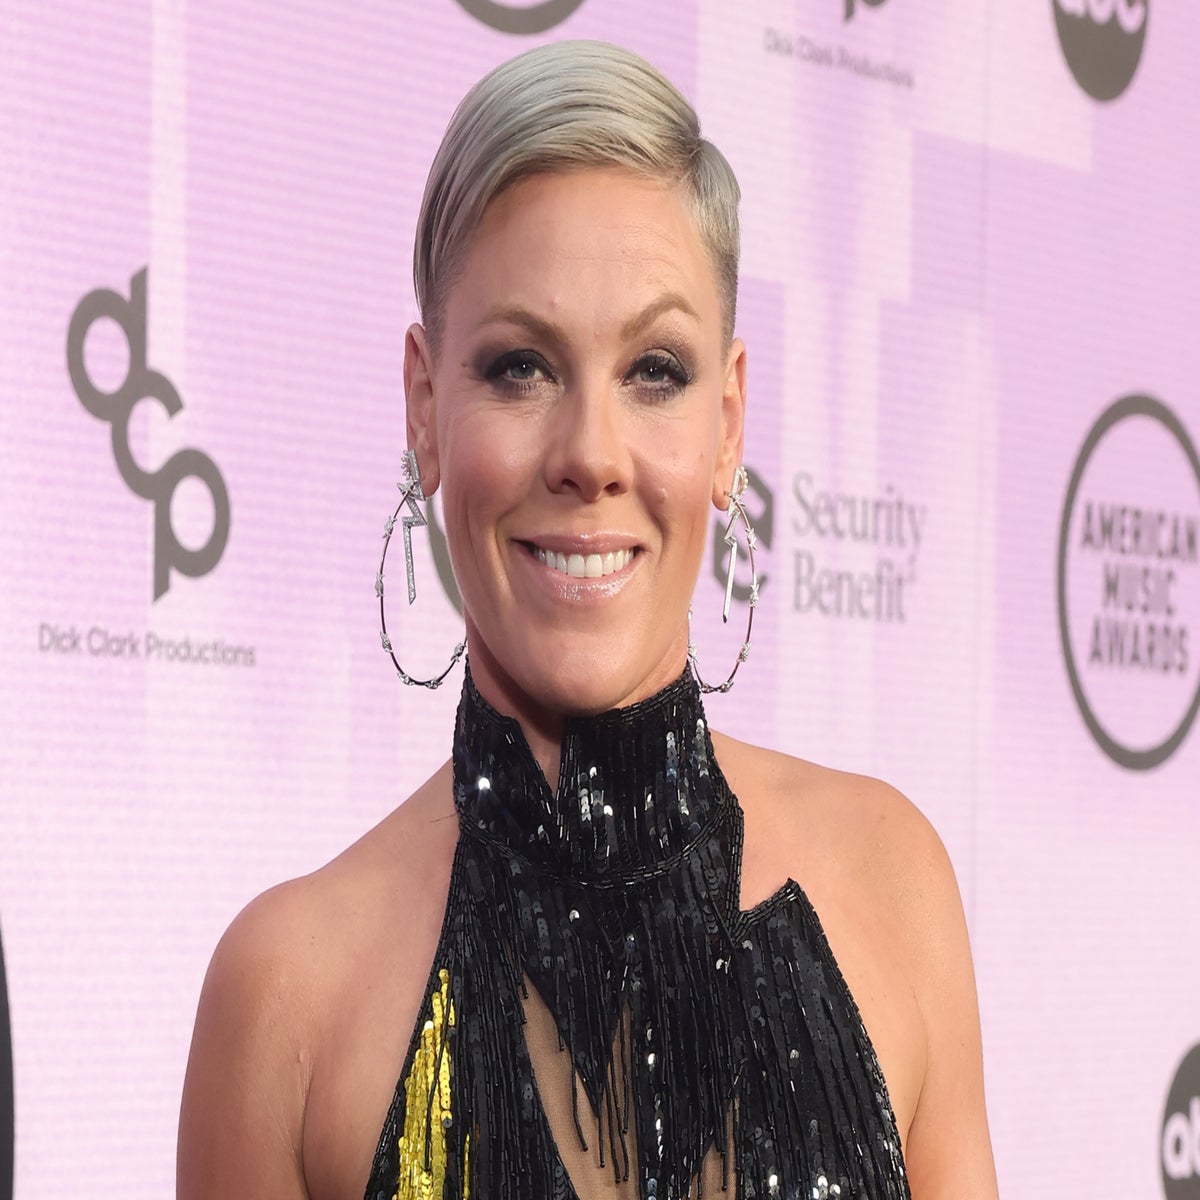 Pink says she struggled with weight loss after her father's death